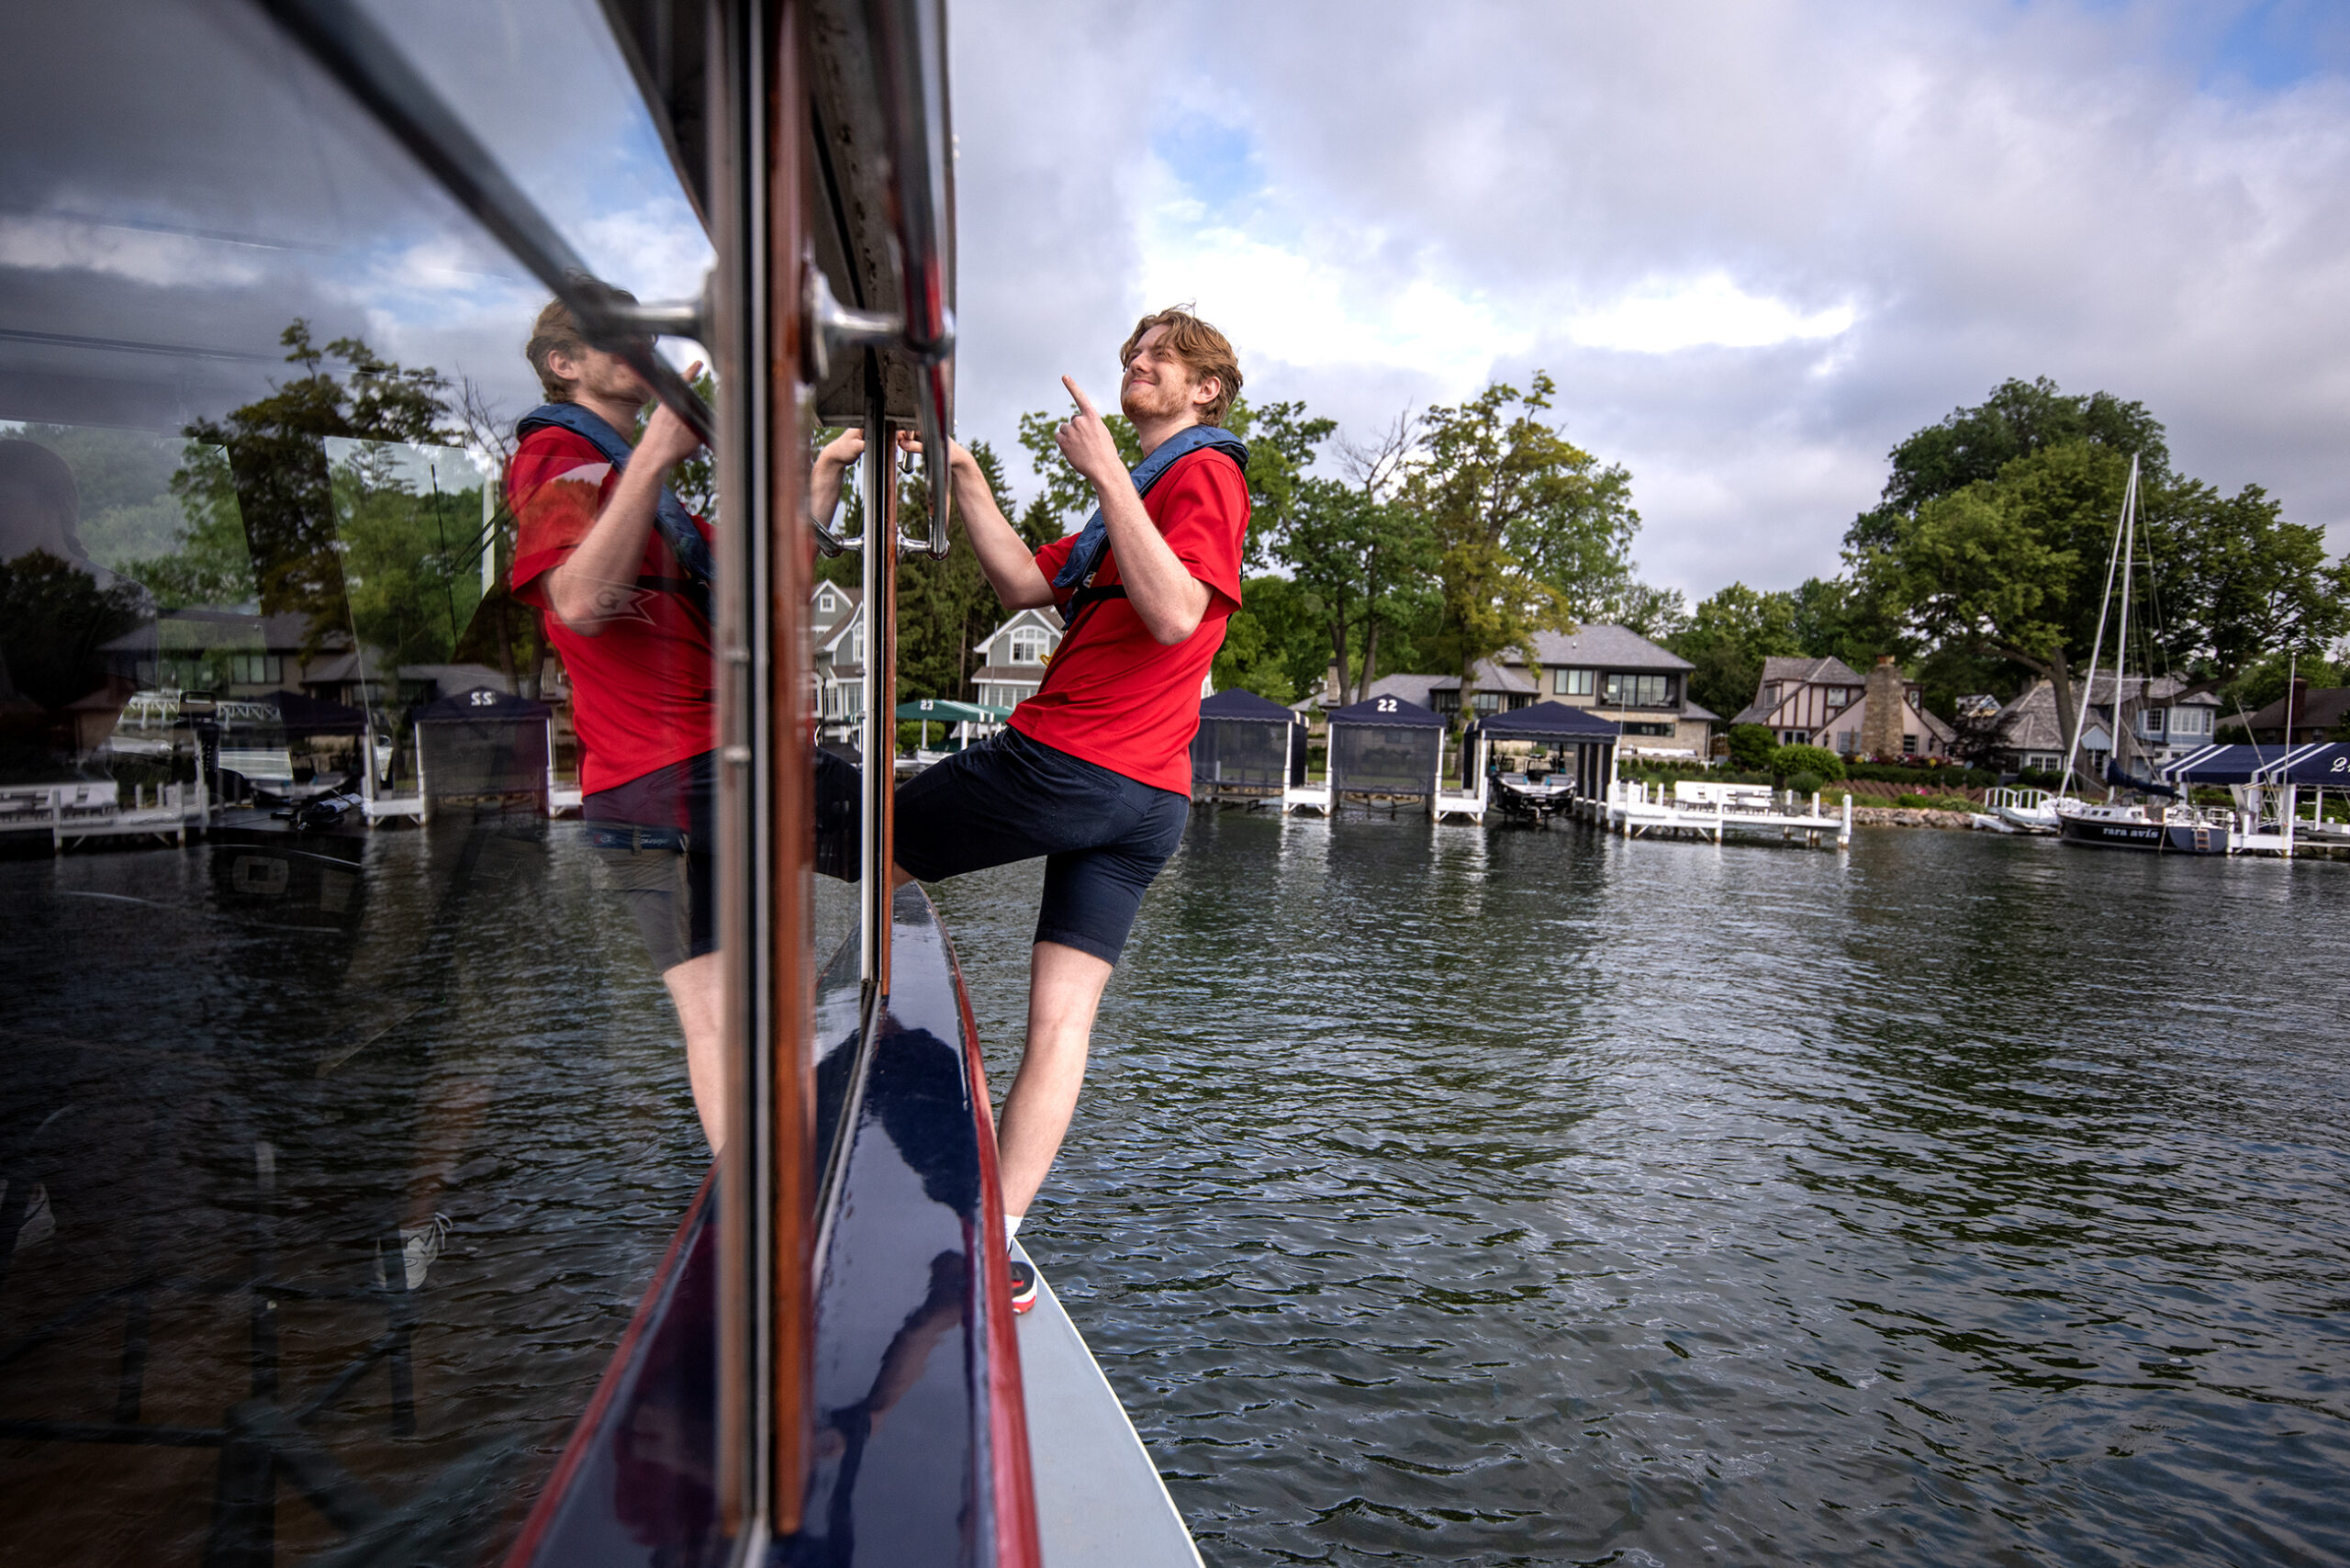 Ethan Connelly of Walworth, Wis., rides on the front of the boat before demonstrating a successful mailboat jump Tuesday, June 13, 2023, in Lake Geneva, Wis. (Angela Major/WPR)